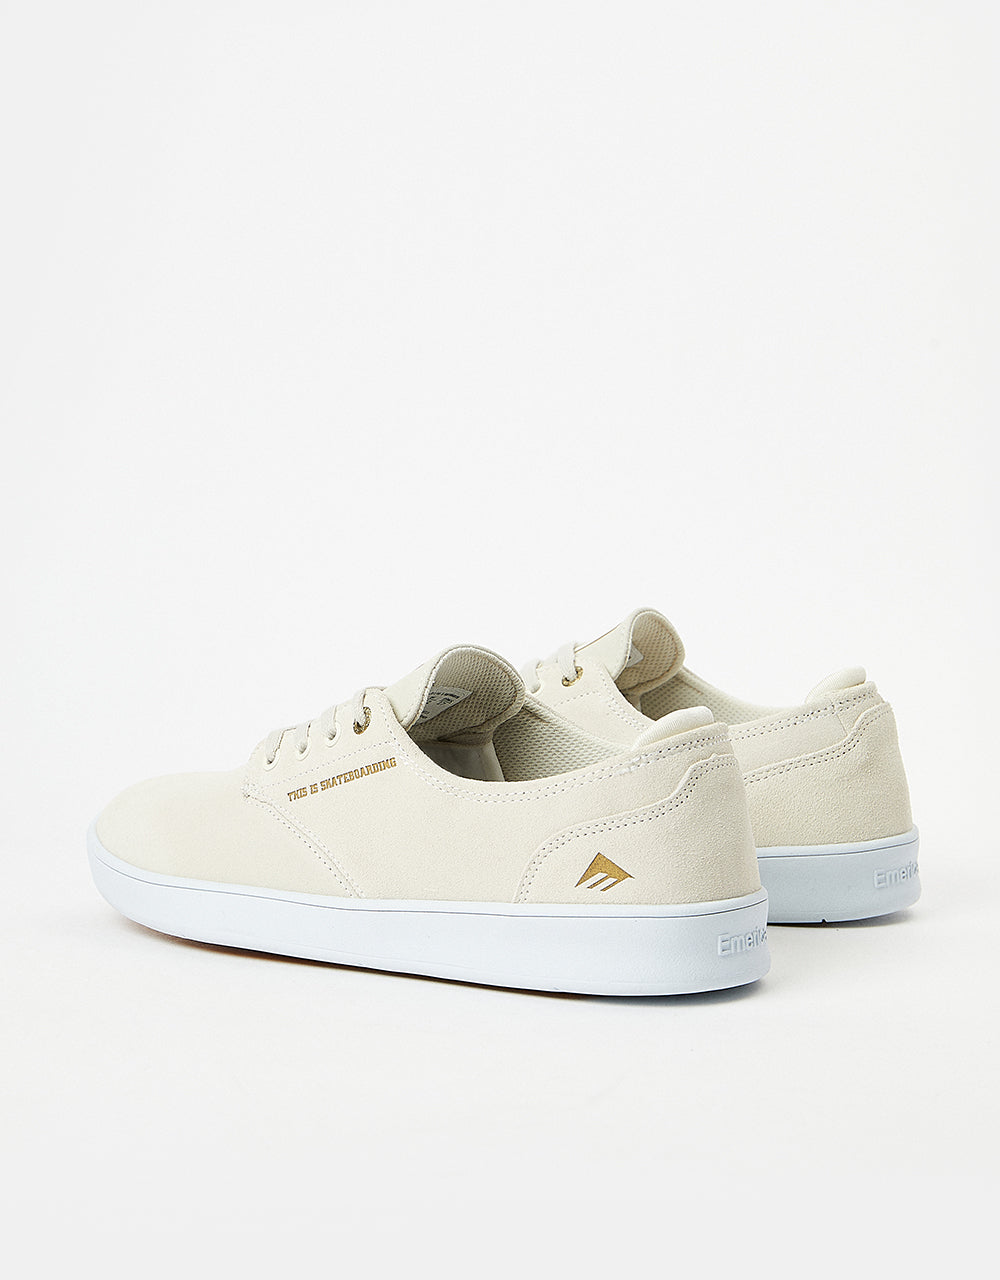 Emerica x This is Skateboarding Romero Laced  Skate Shoes - White